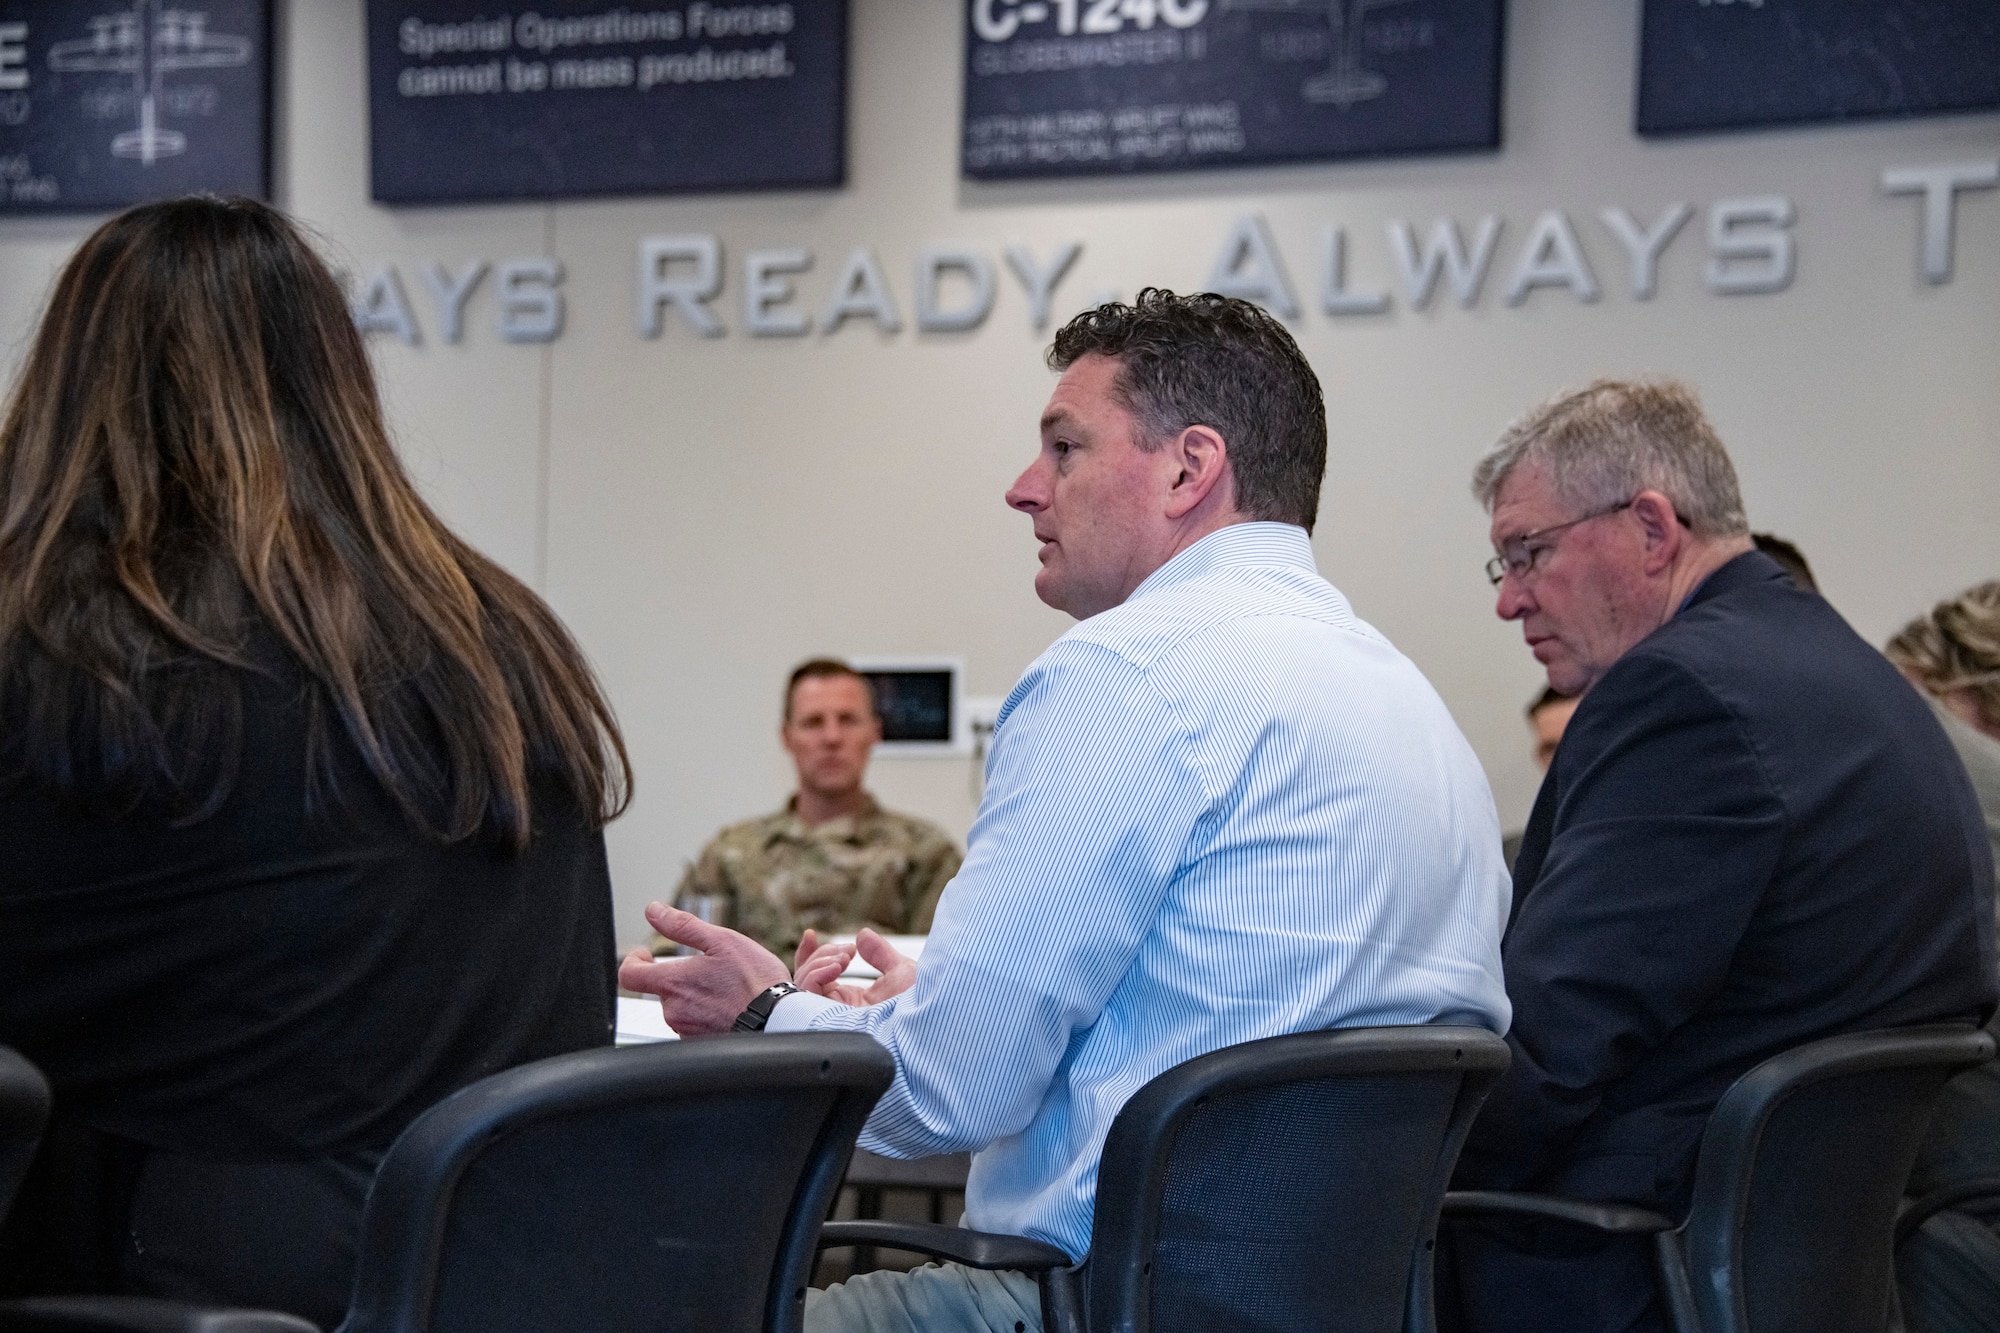 The Assistant Secretary of Defense for Special Operations and Low-Intensity Conflict participates in a presentation with other officials in business attire and Airmen in OCPs